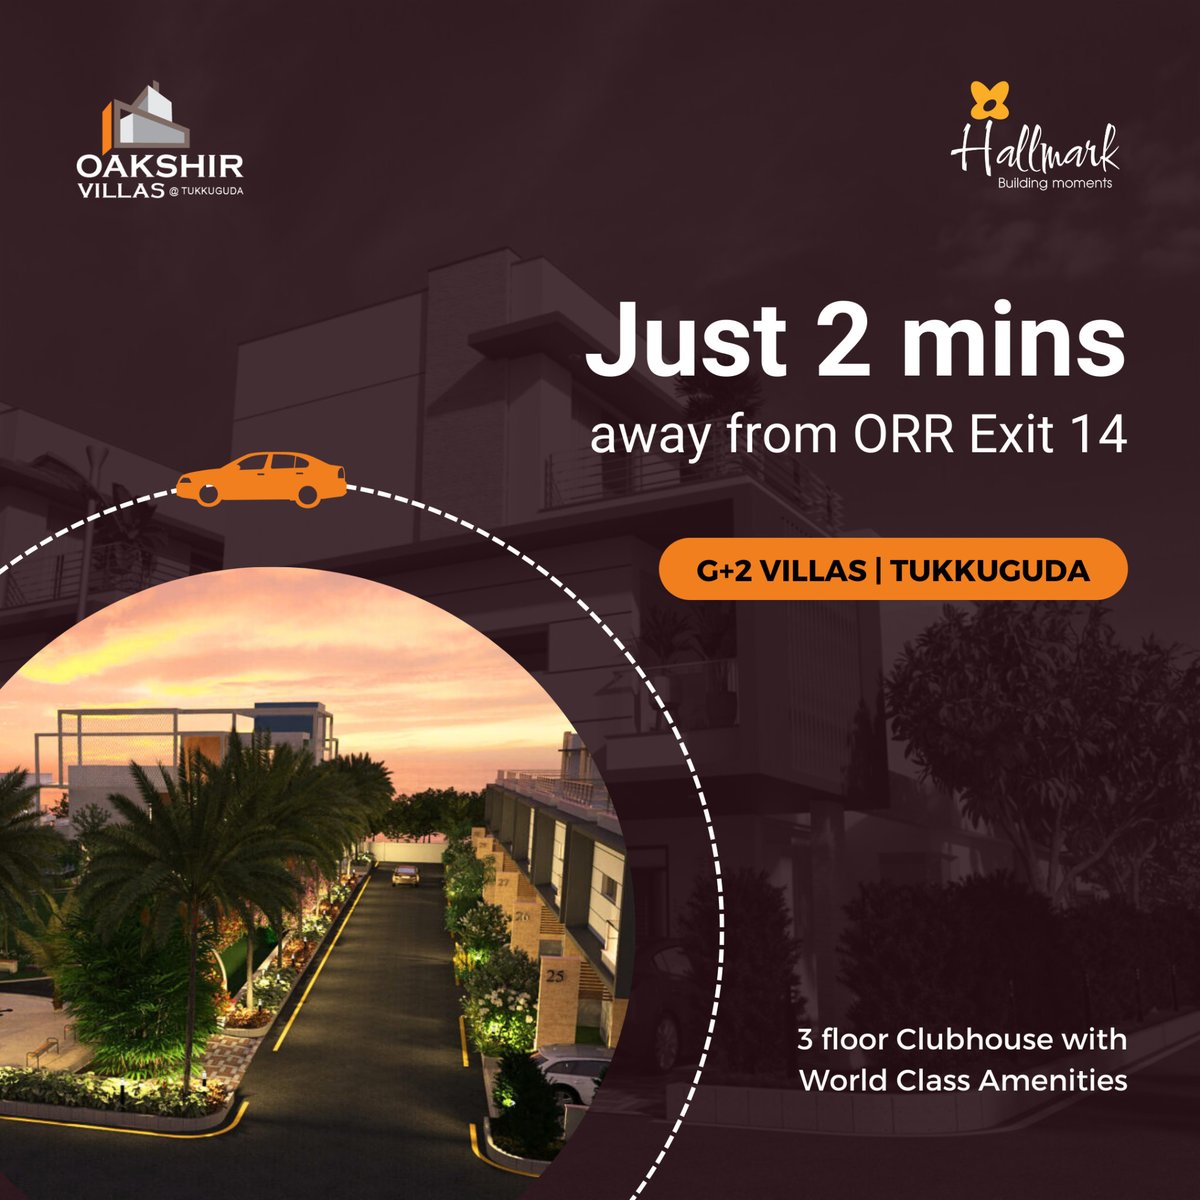 The perks of living close to ORR in Hyderabad are endless. Don't believe us? Come visit our site and see for yourself!

#HallmarkBuilders #HallmarkOakshir #VillaLife #BestAmenities #Tukkuguda #Hyderabad